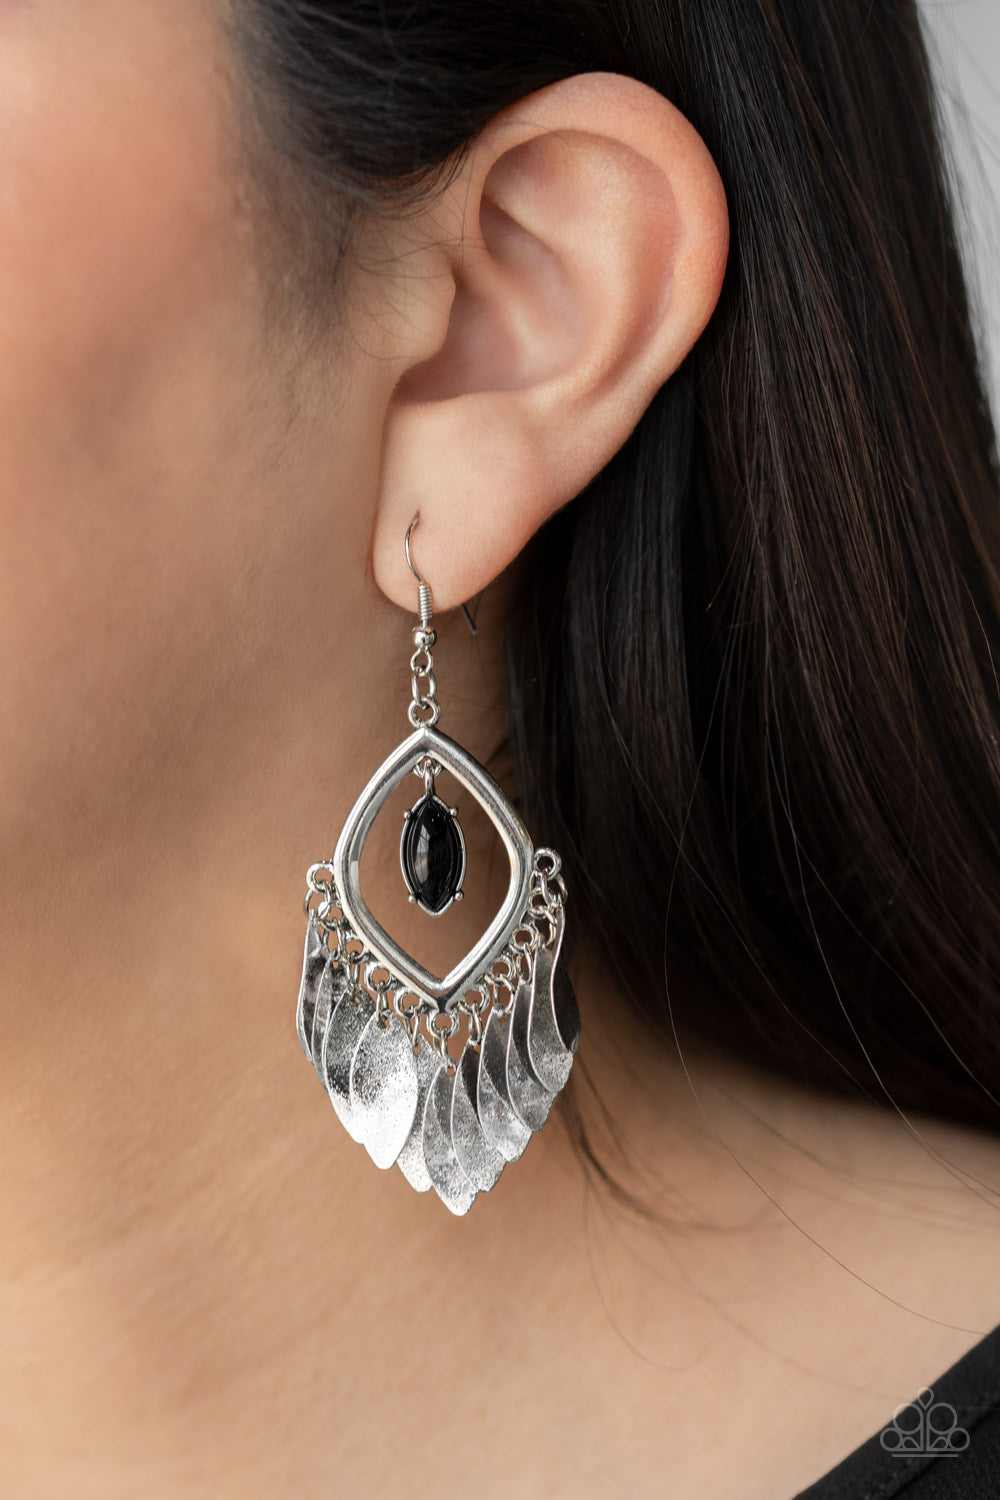 Paparazzi Sunset Soul - Black - Hammered Antiqued - Fringe Silver Earrings - $5 Jewelry with Ashley Swint